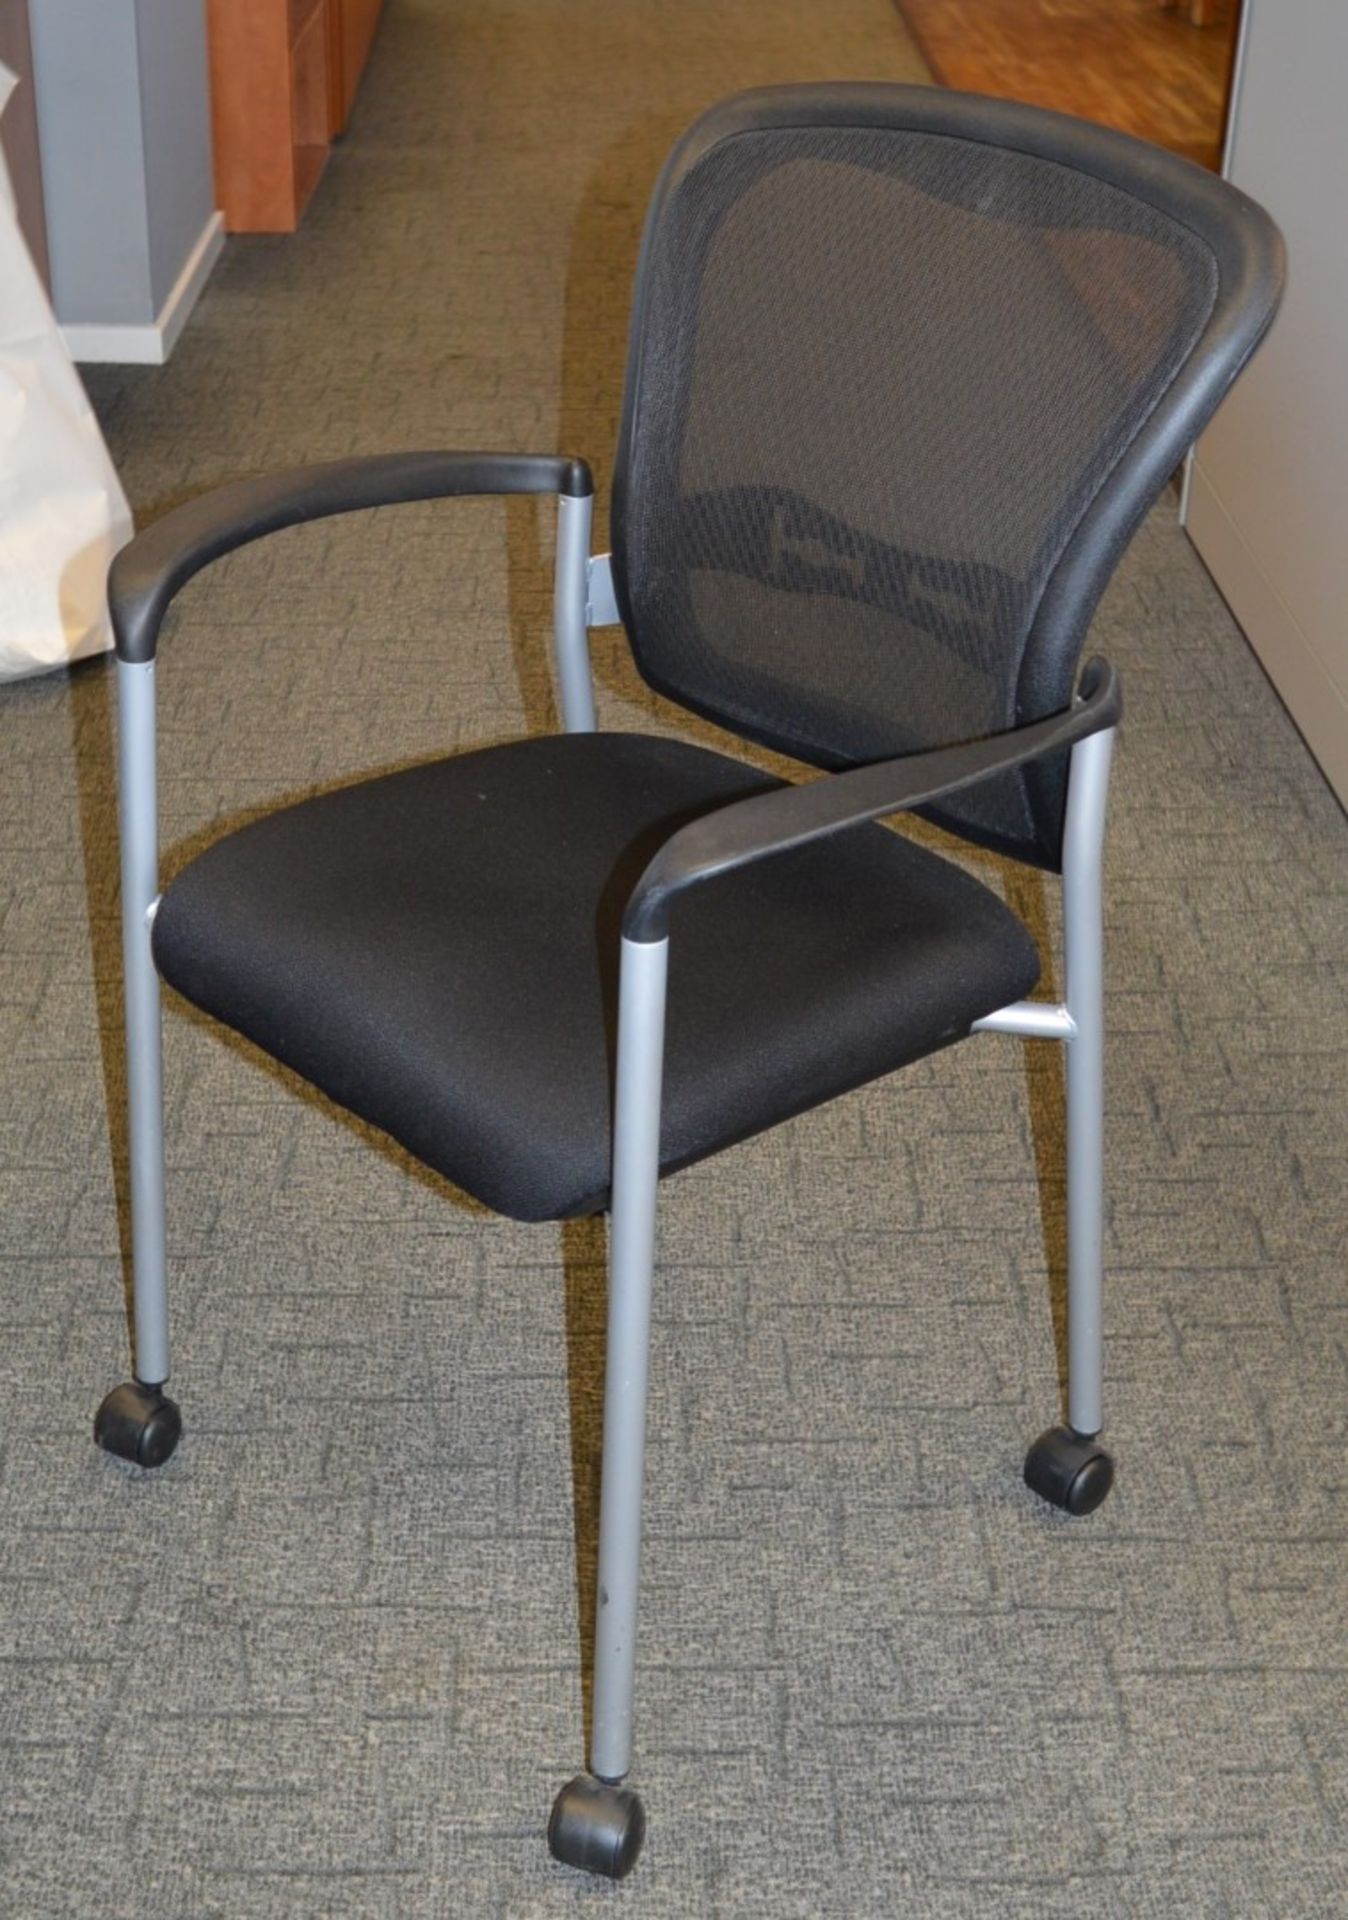 4 x Senator SL829A Office Chairs With Castors - Ergonomical Chairs With Armrests - High Quality - Image 2 of 5